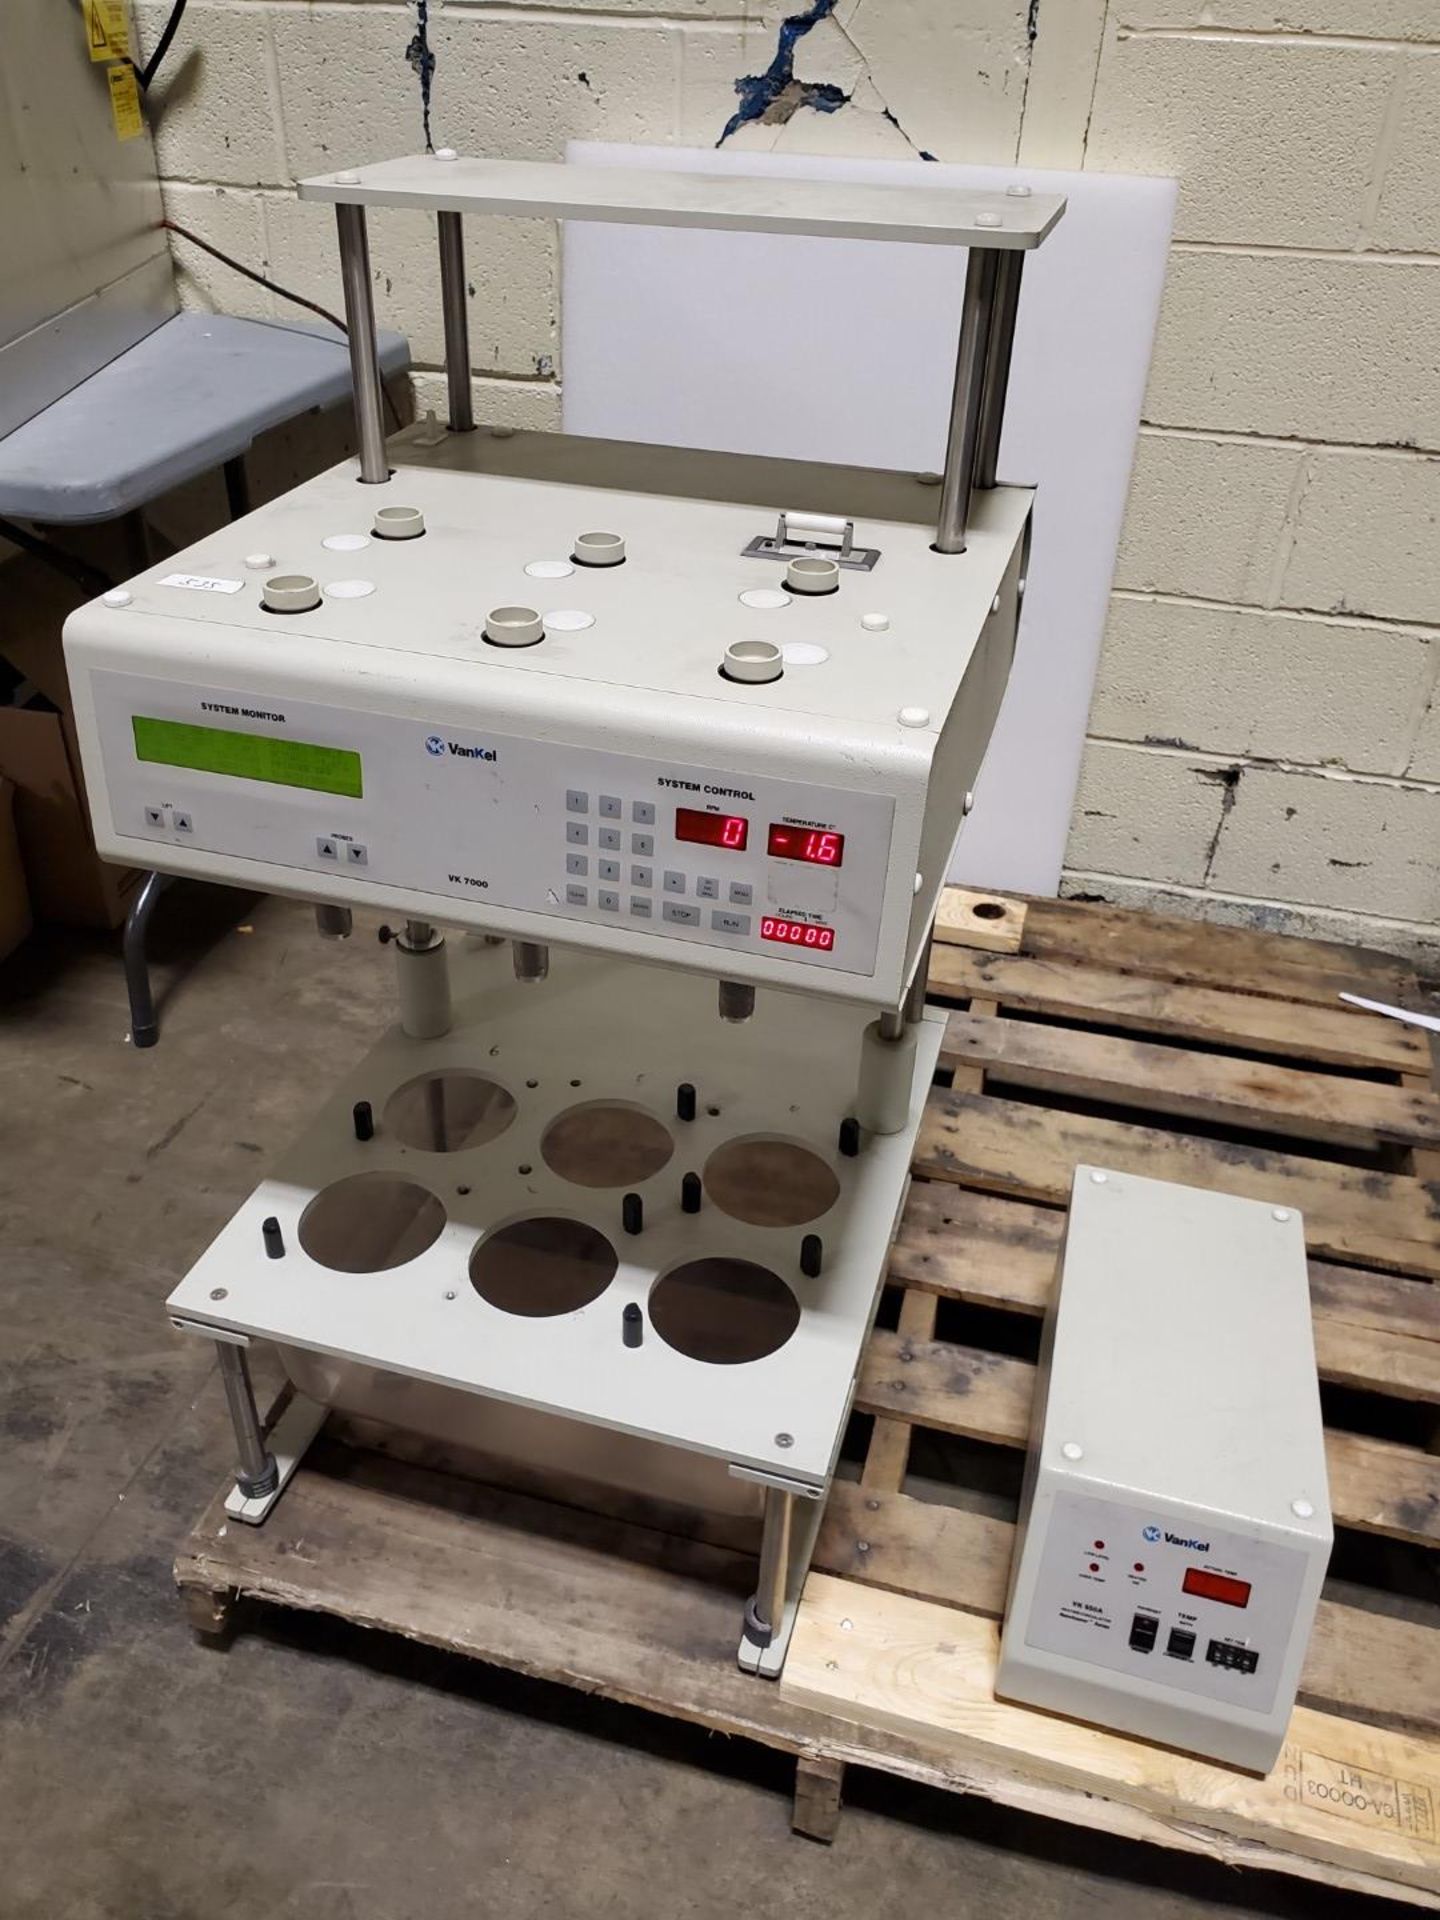 Vankel dissolution tester, model VK-7000, (6) station, with controls and built-in printer, including